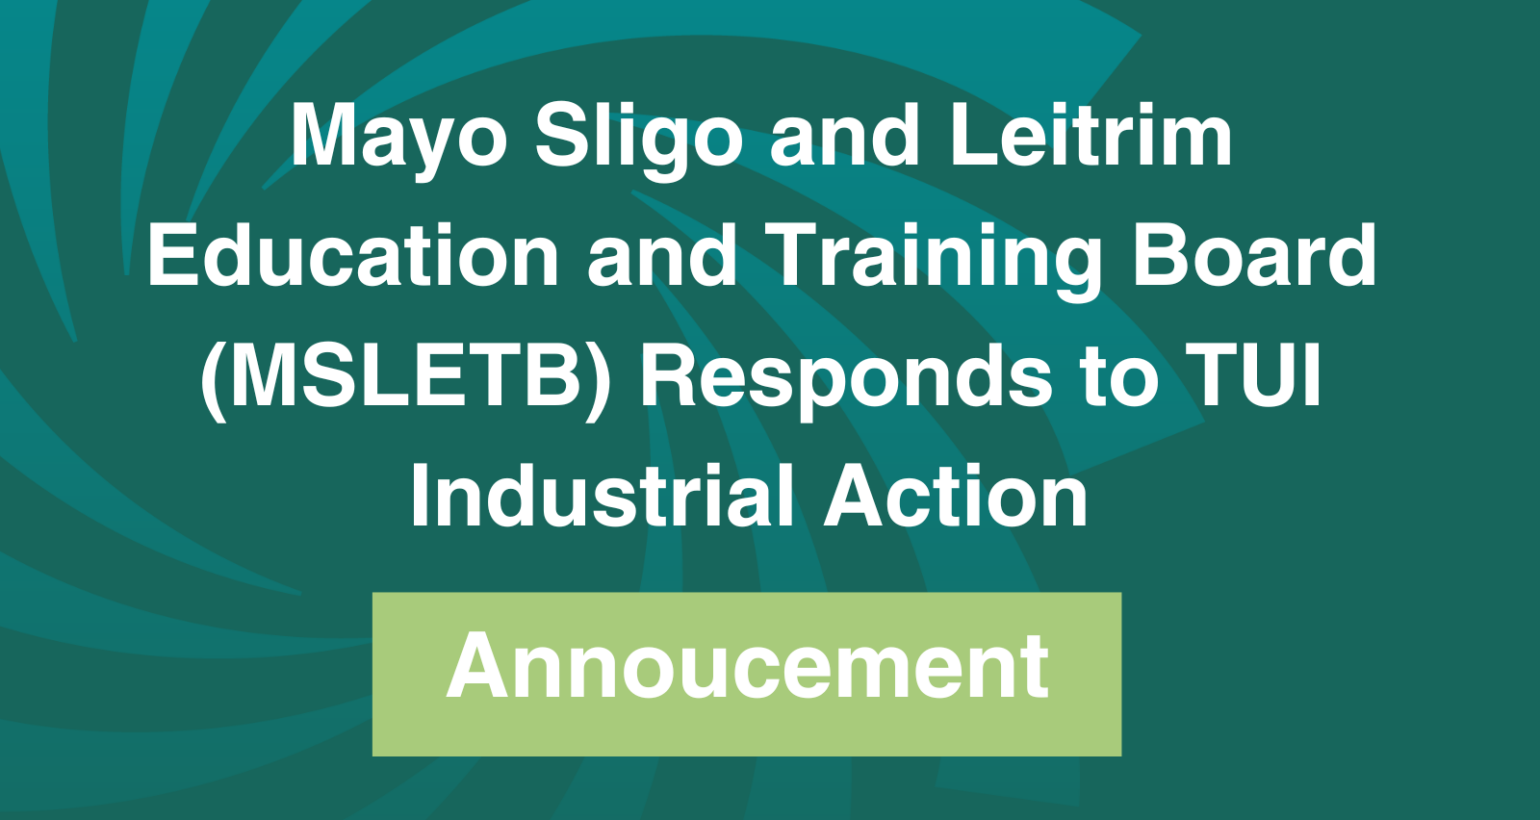 Mayo Sligo and Leitrim Education and Training Board (MSLETB) Responds to TUI Industrial Action Announcement